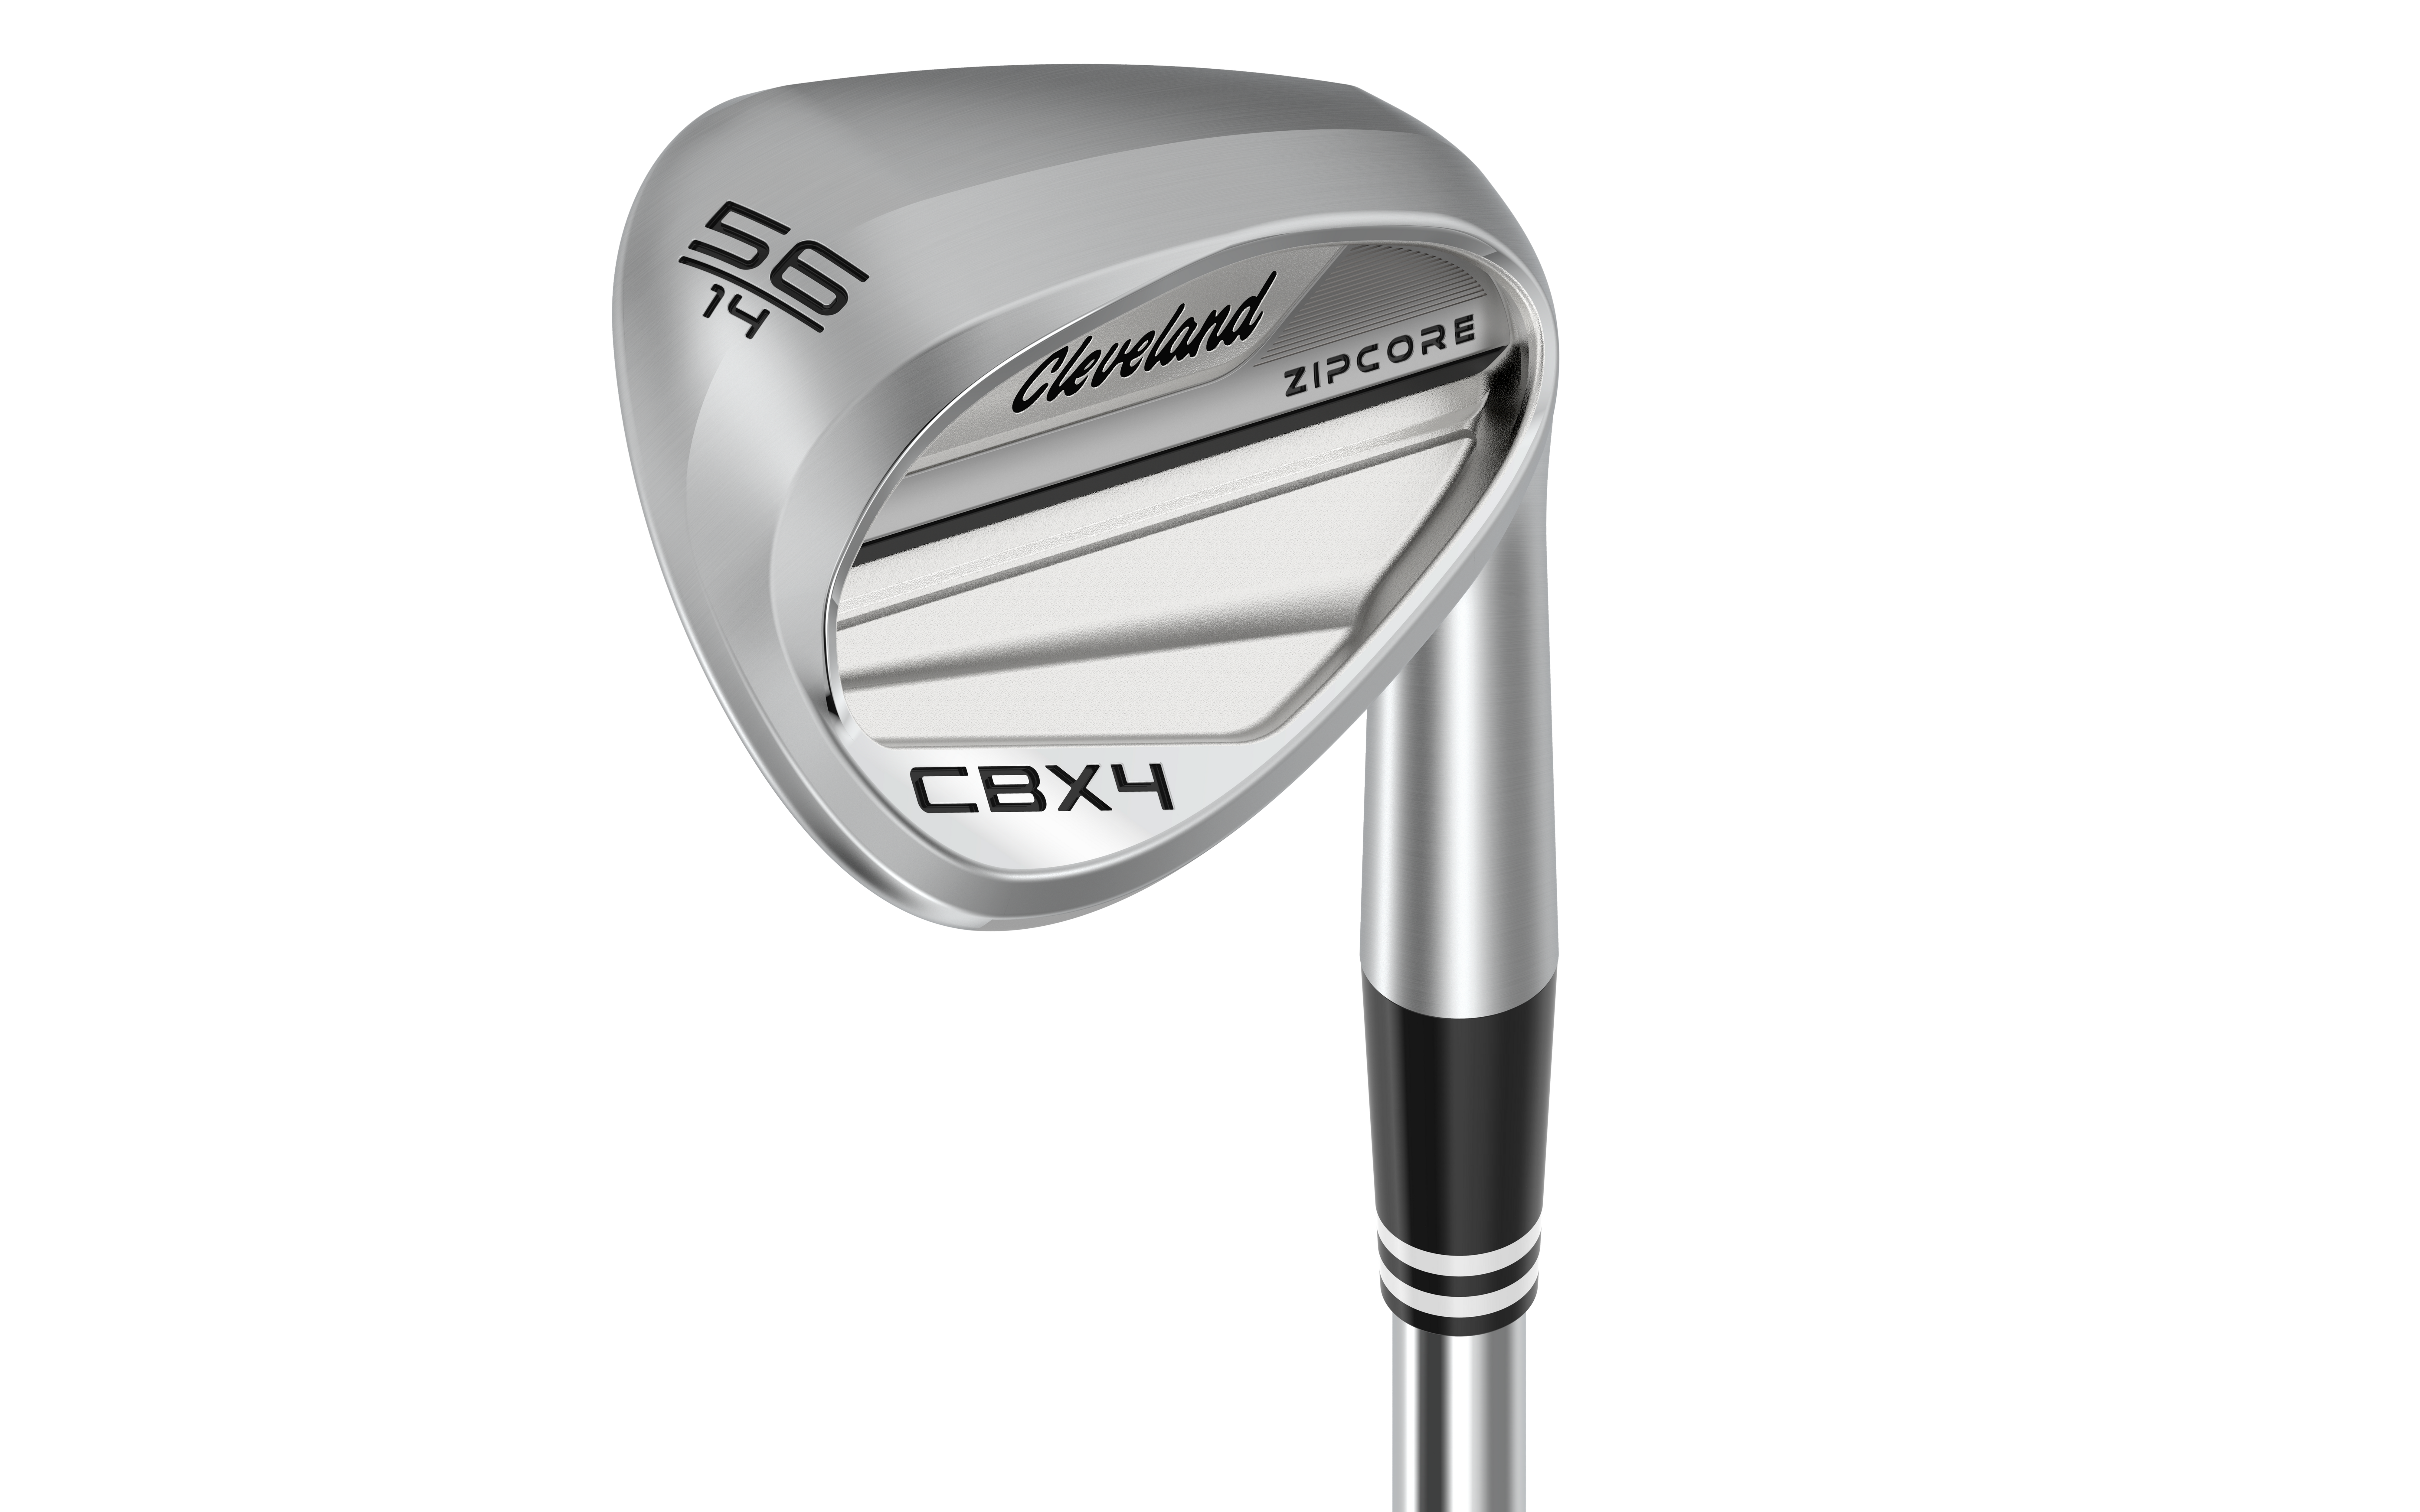 CBX4 Zipcore Tour Satin Wedge with Steel Shaft | CLEVELAND 